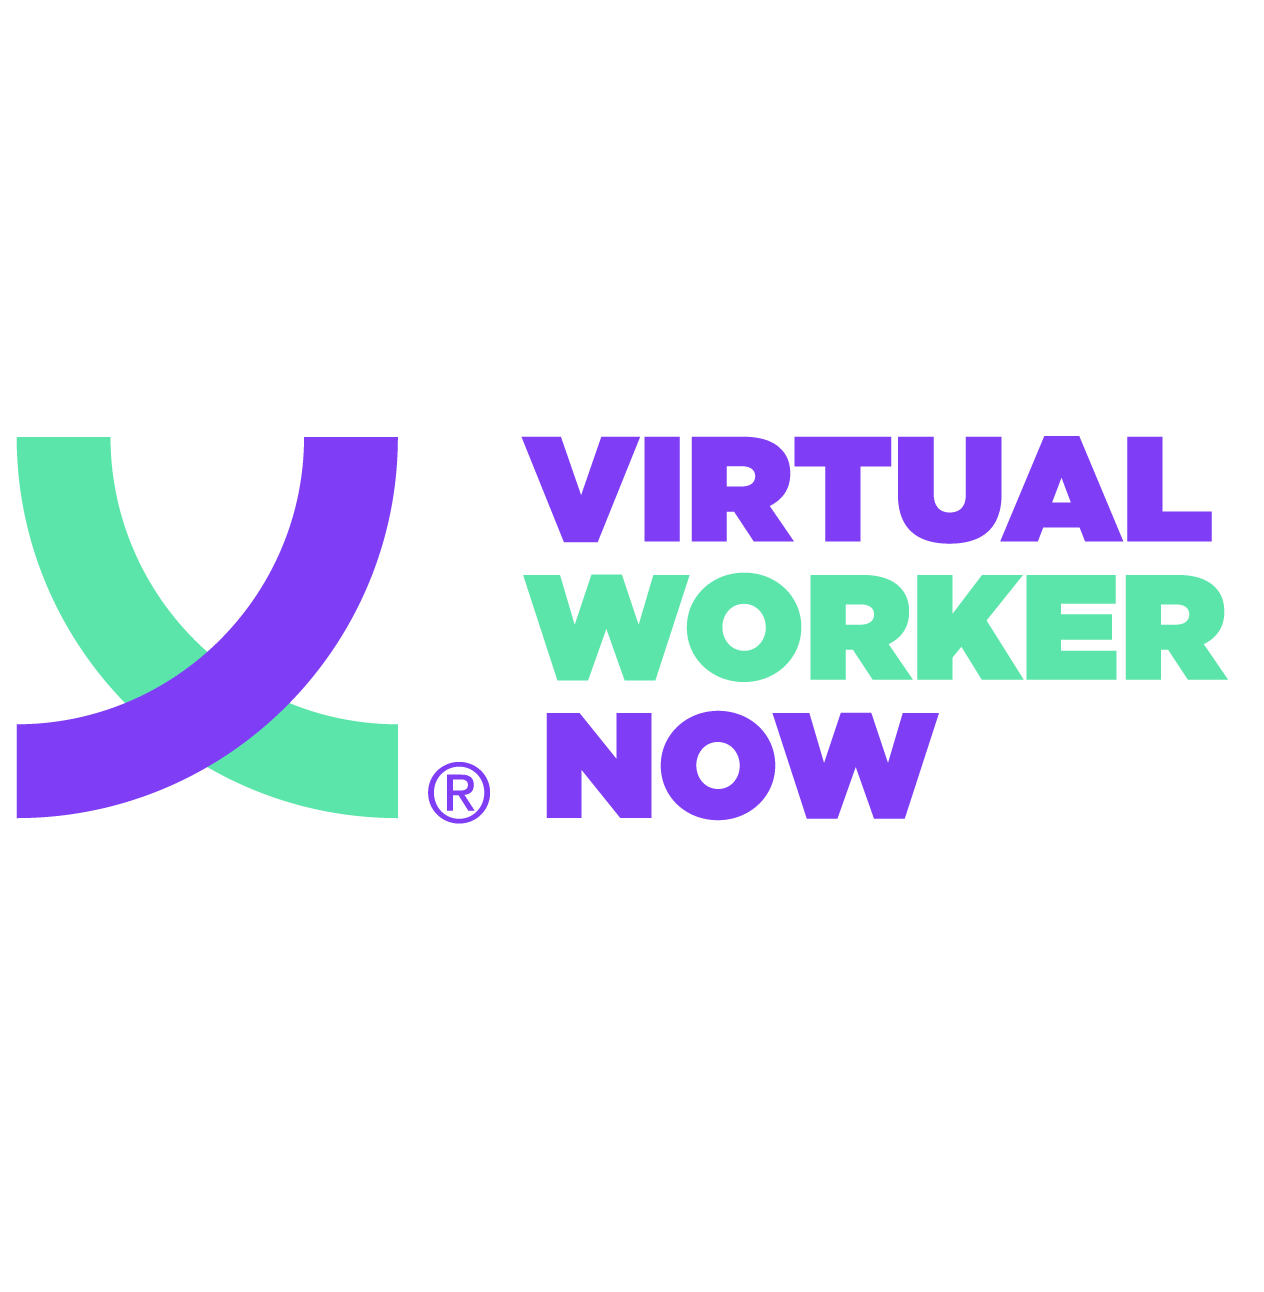 Virtual worker now